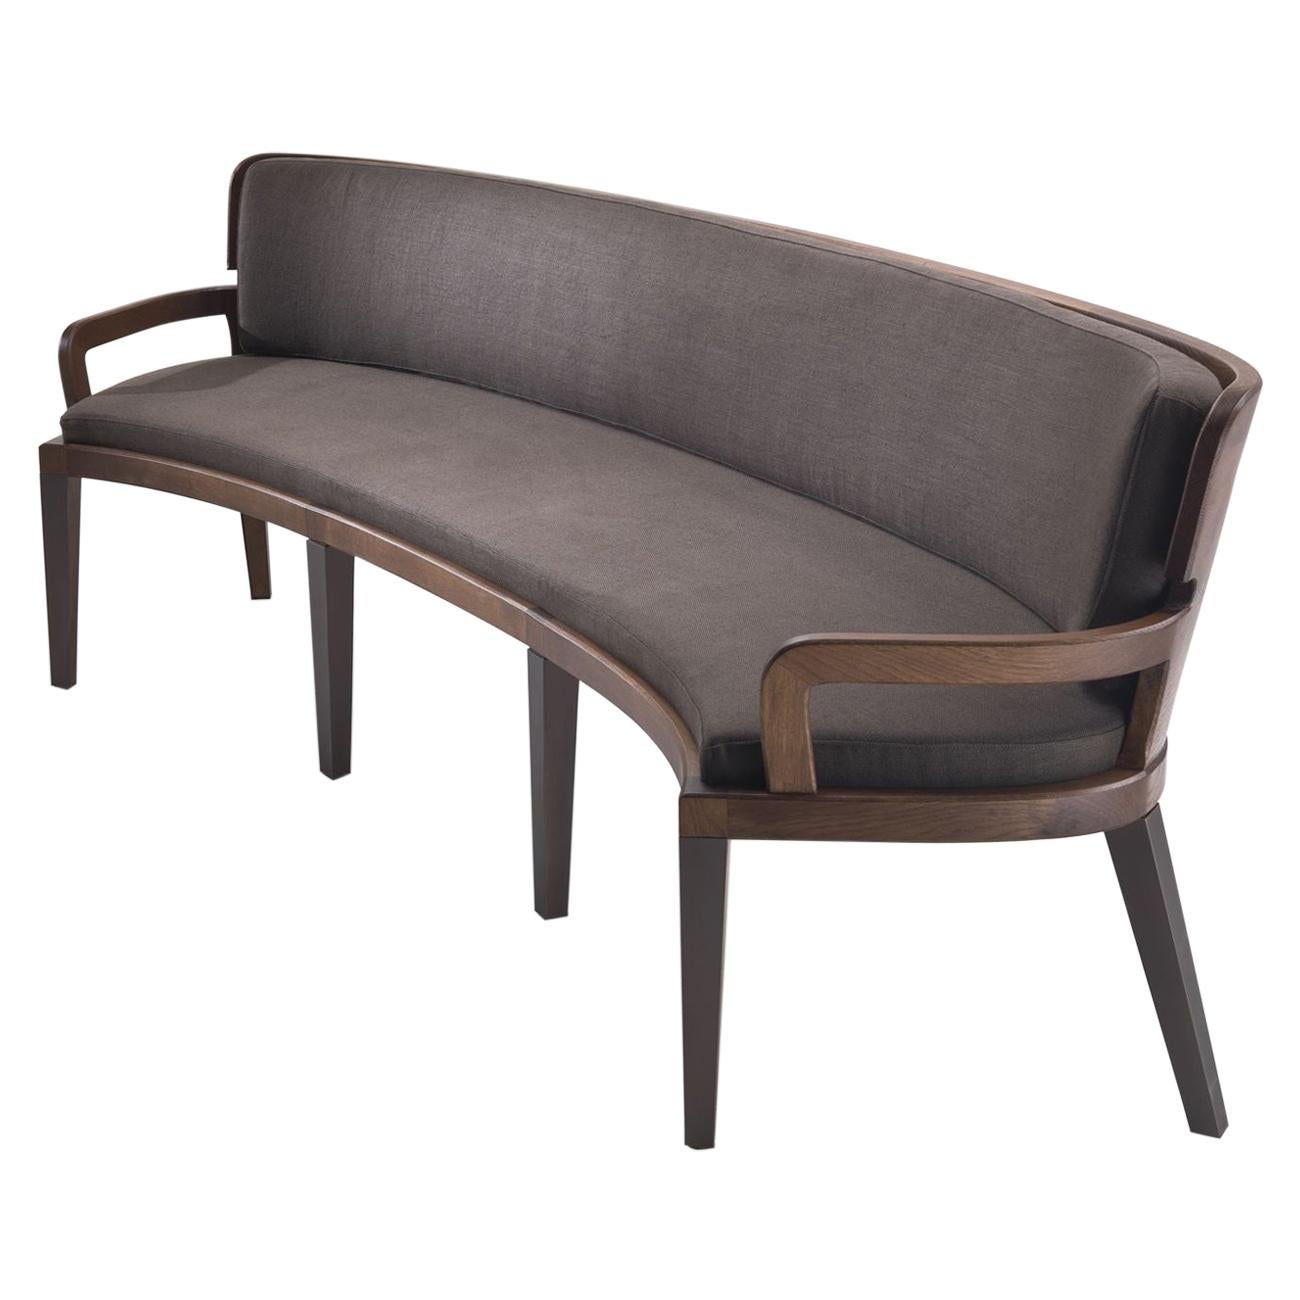 BULLE Round Curved Bench in Solid Oak and Metal Details on Legs